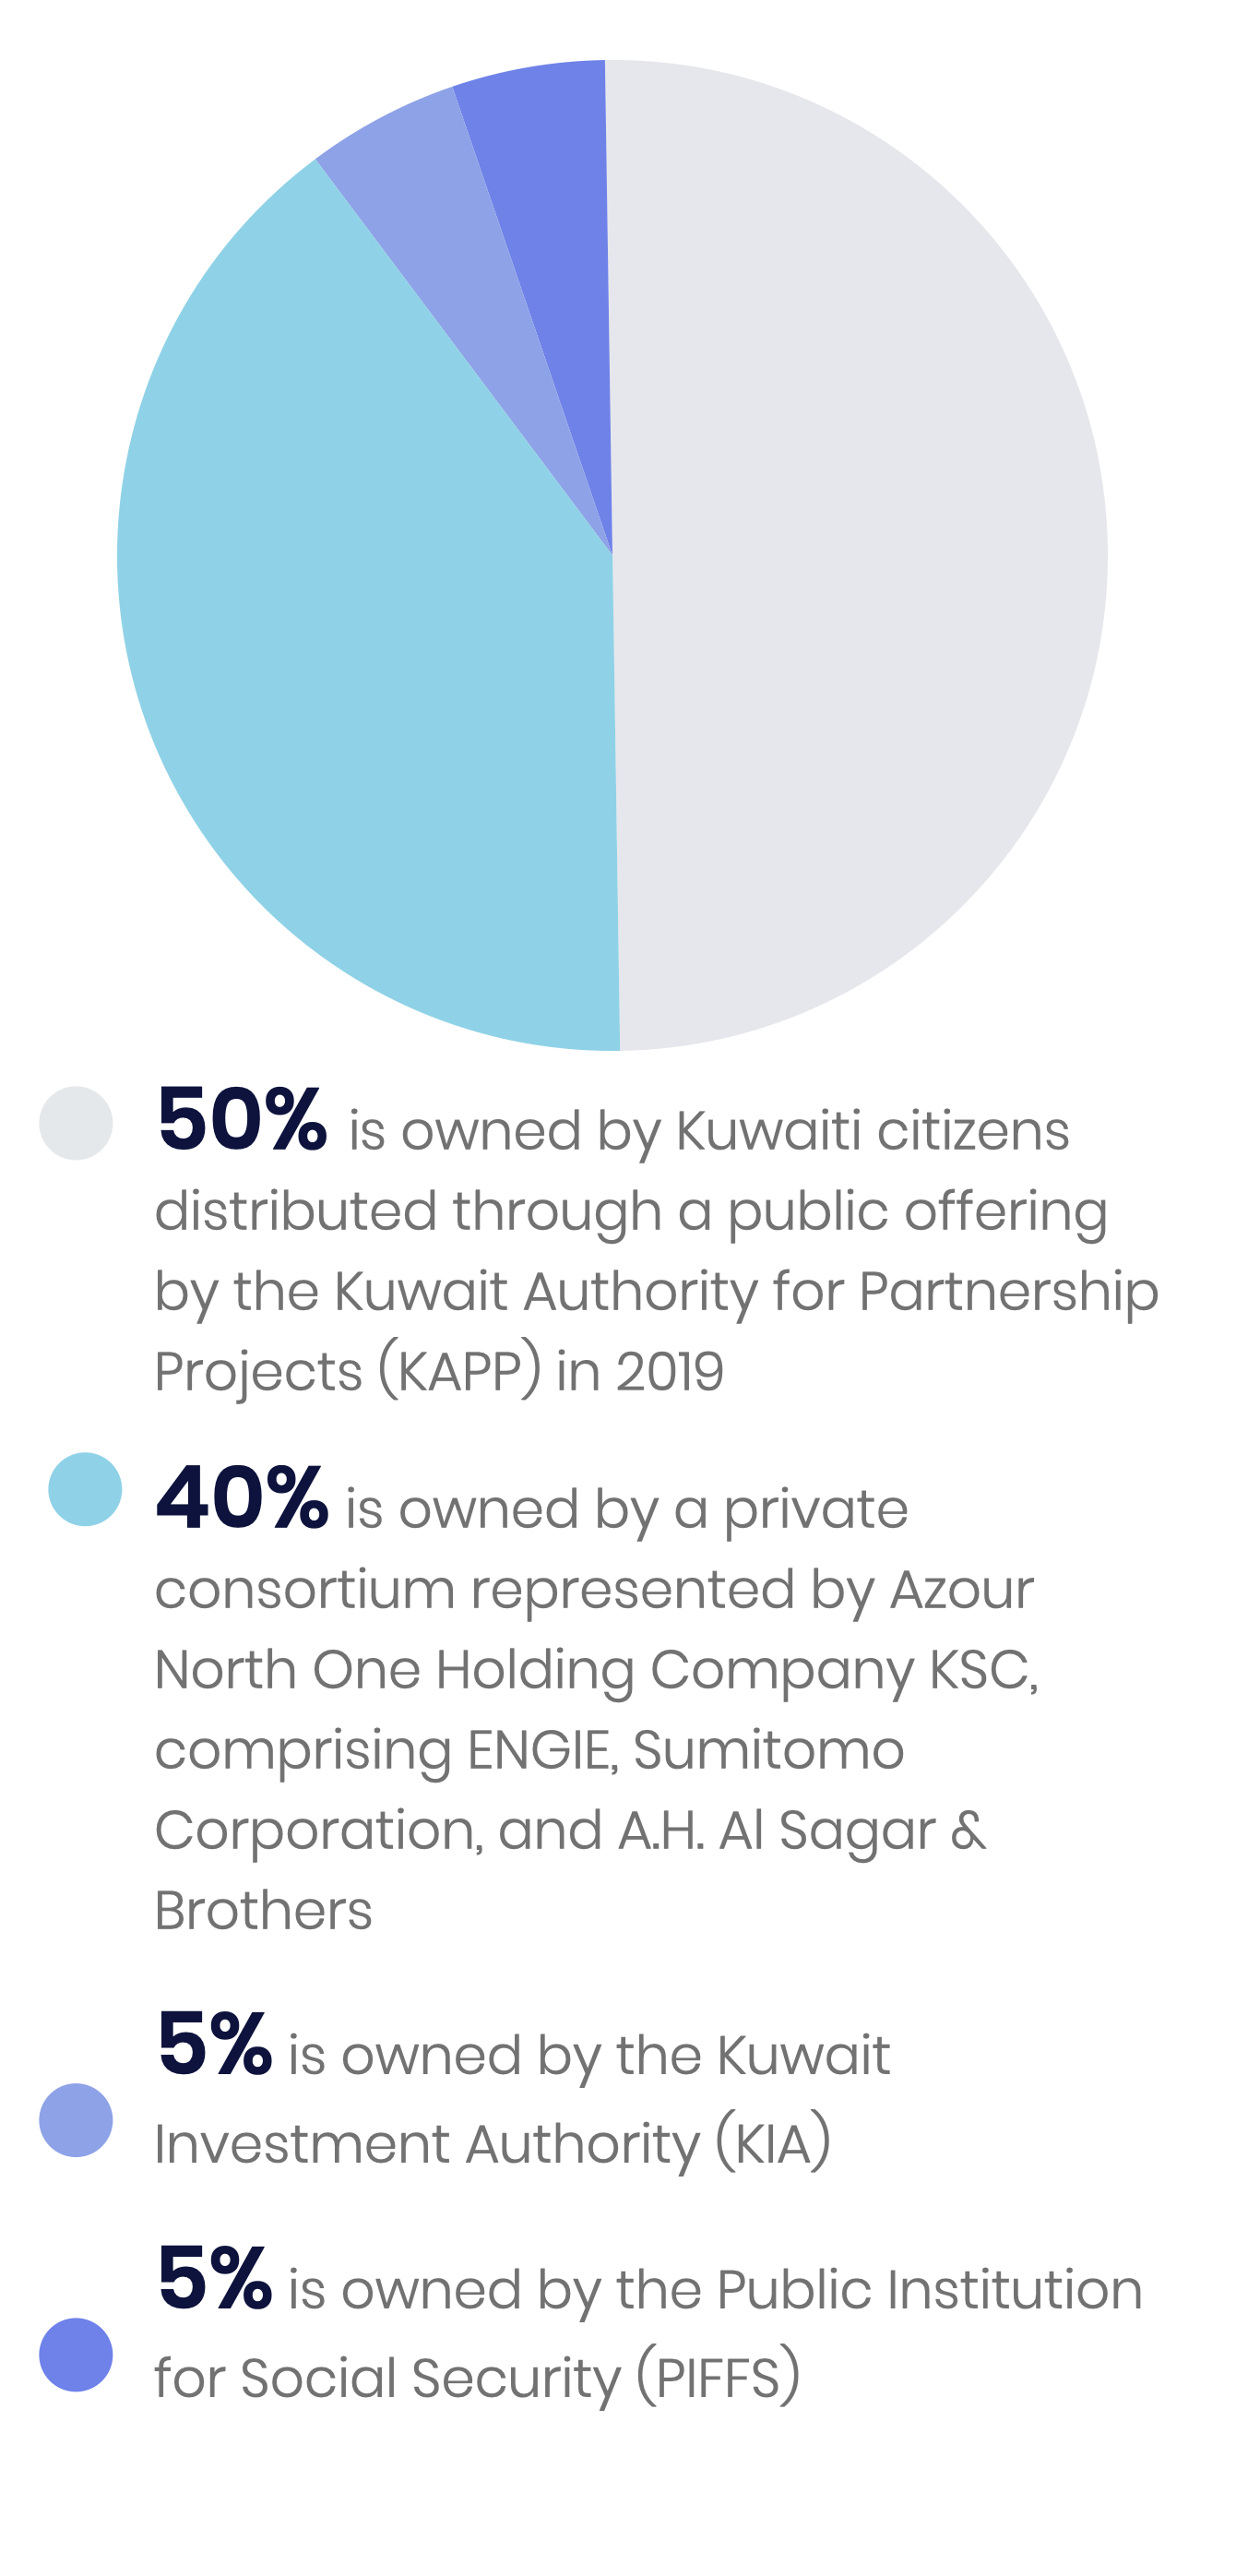 Shareholding Structure: 50% is owned by Kuwaiti citizens, 40% by Azour North One Holding Company KSC, 5% by the Kuwait Investment Authority, 5% by the Public Institution for Social Security.